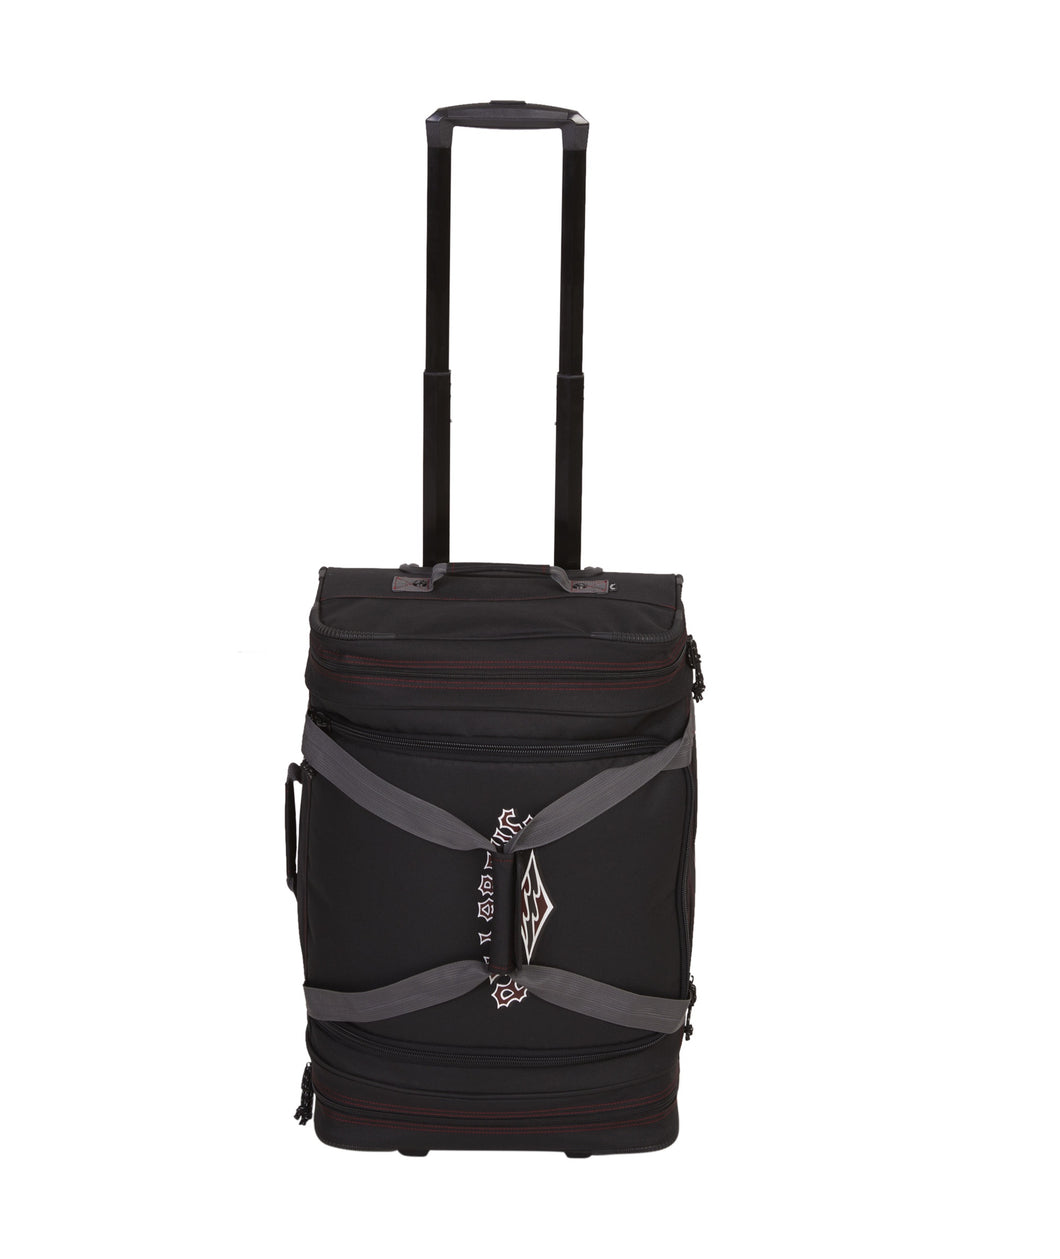 Destination Carry-On 45L Wheeled Cabin Suitcase